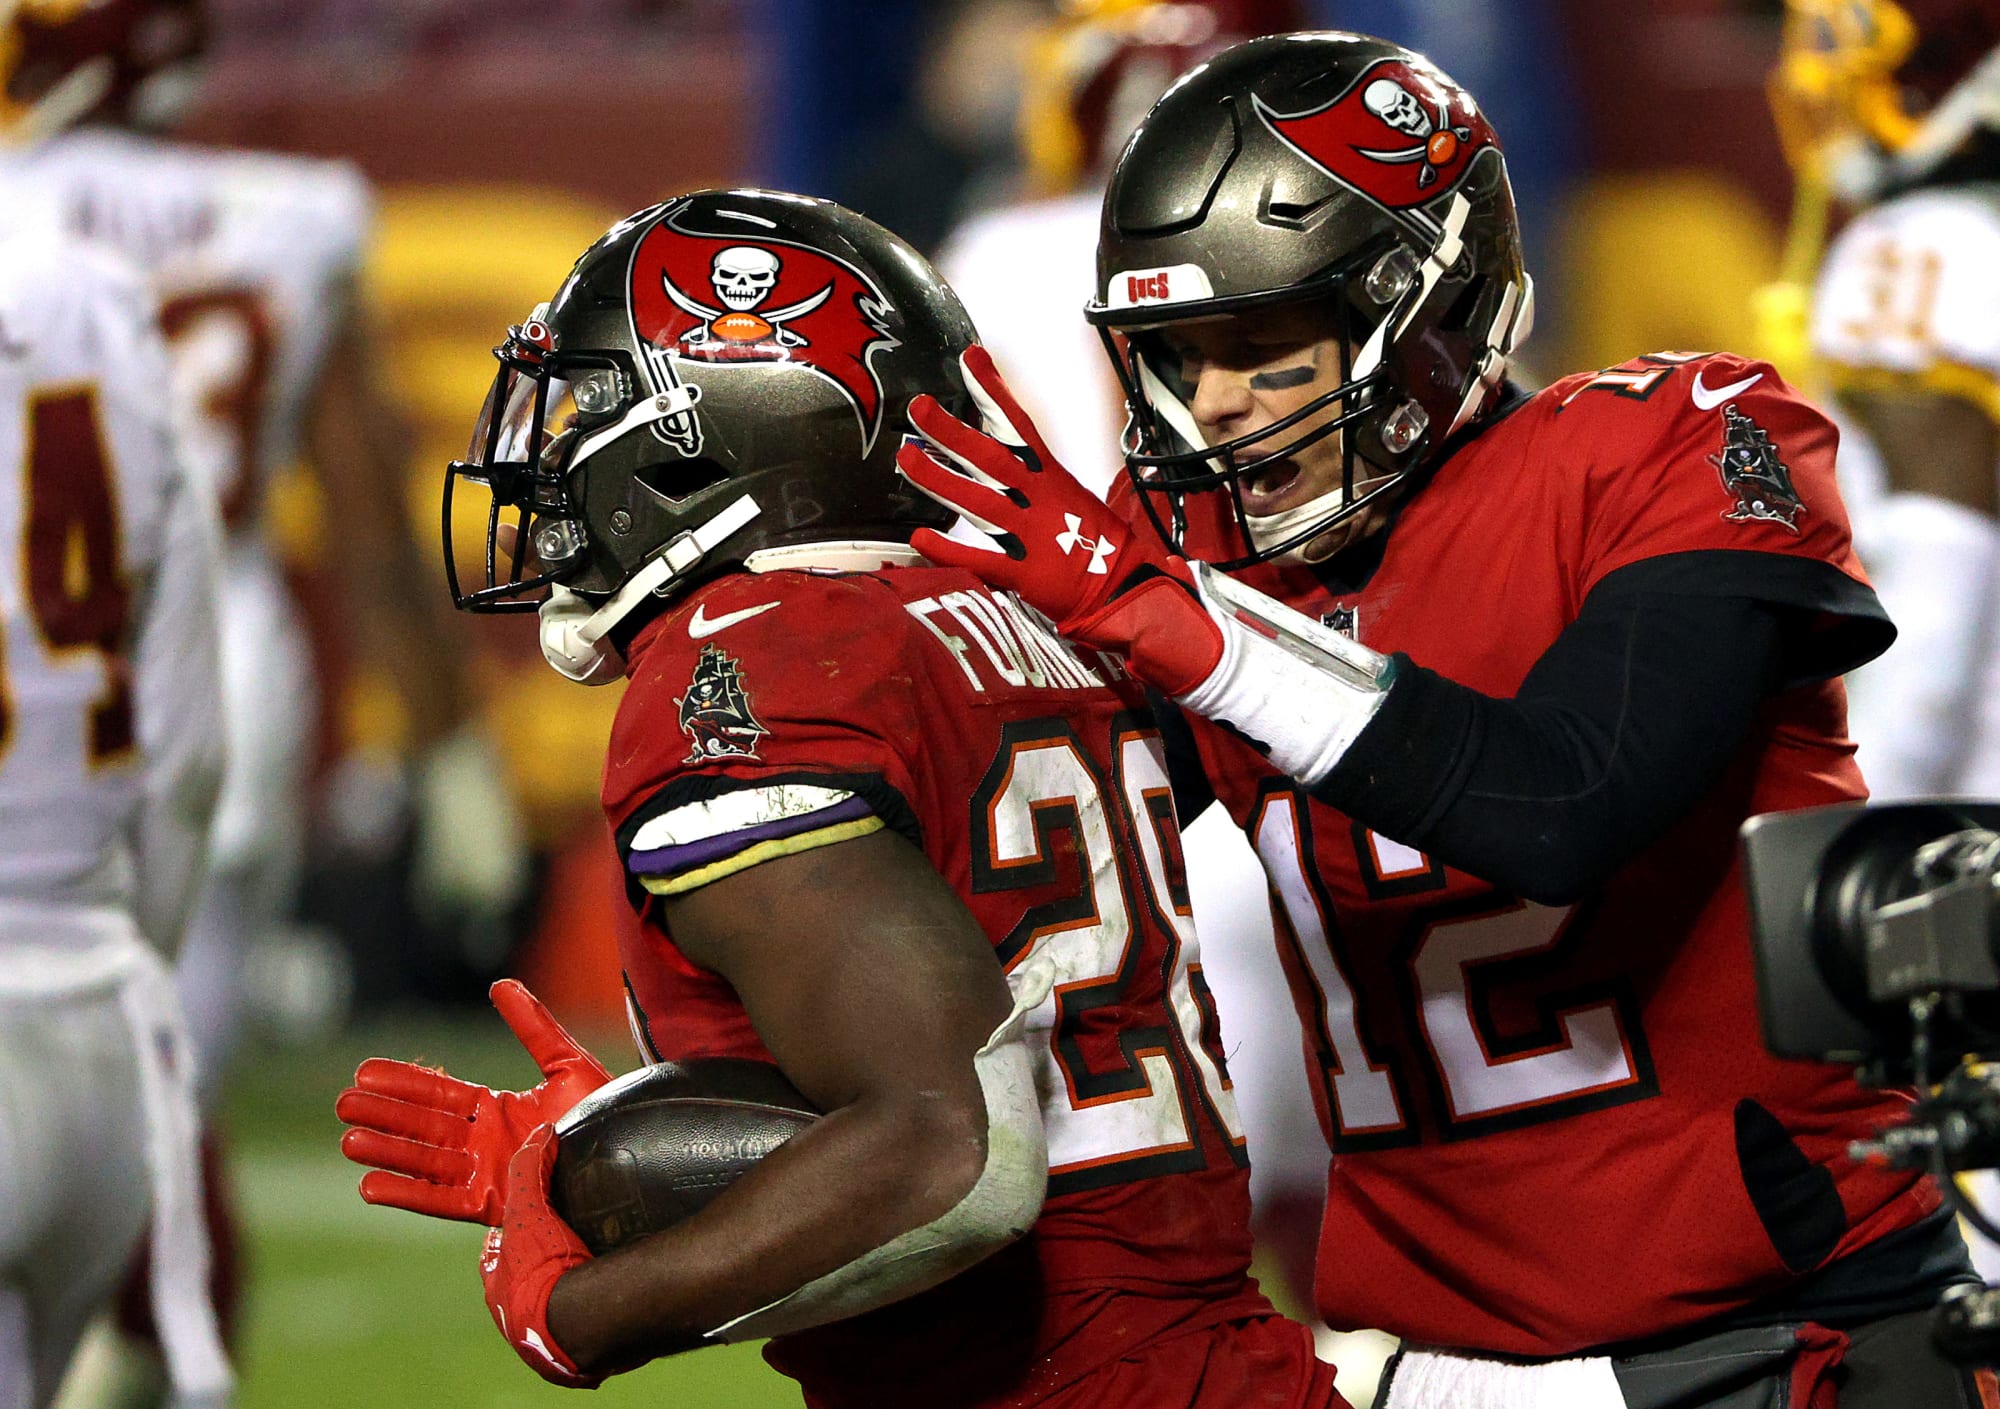 Tampa Bay Buccaneers are fortunate to win at Washington